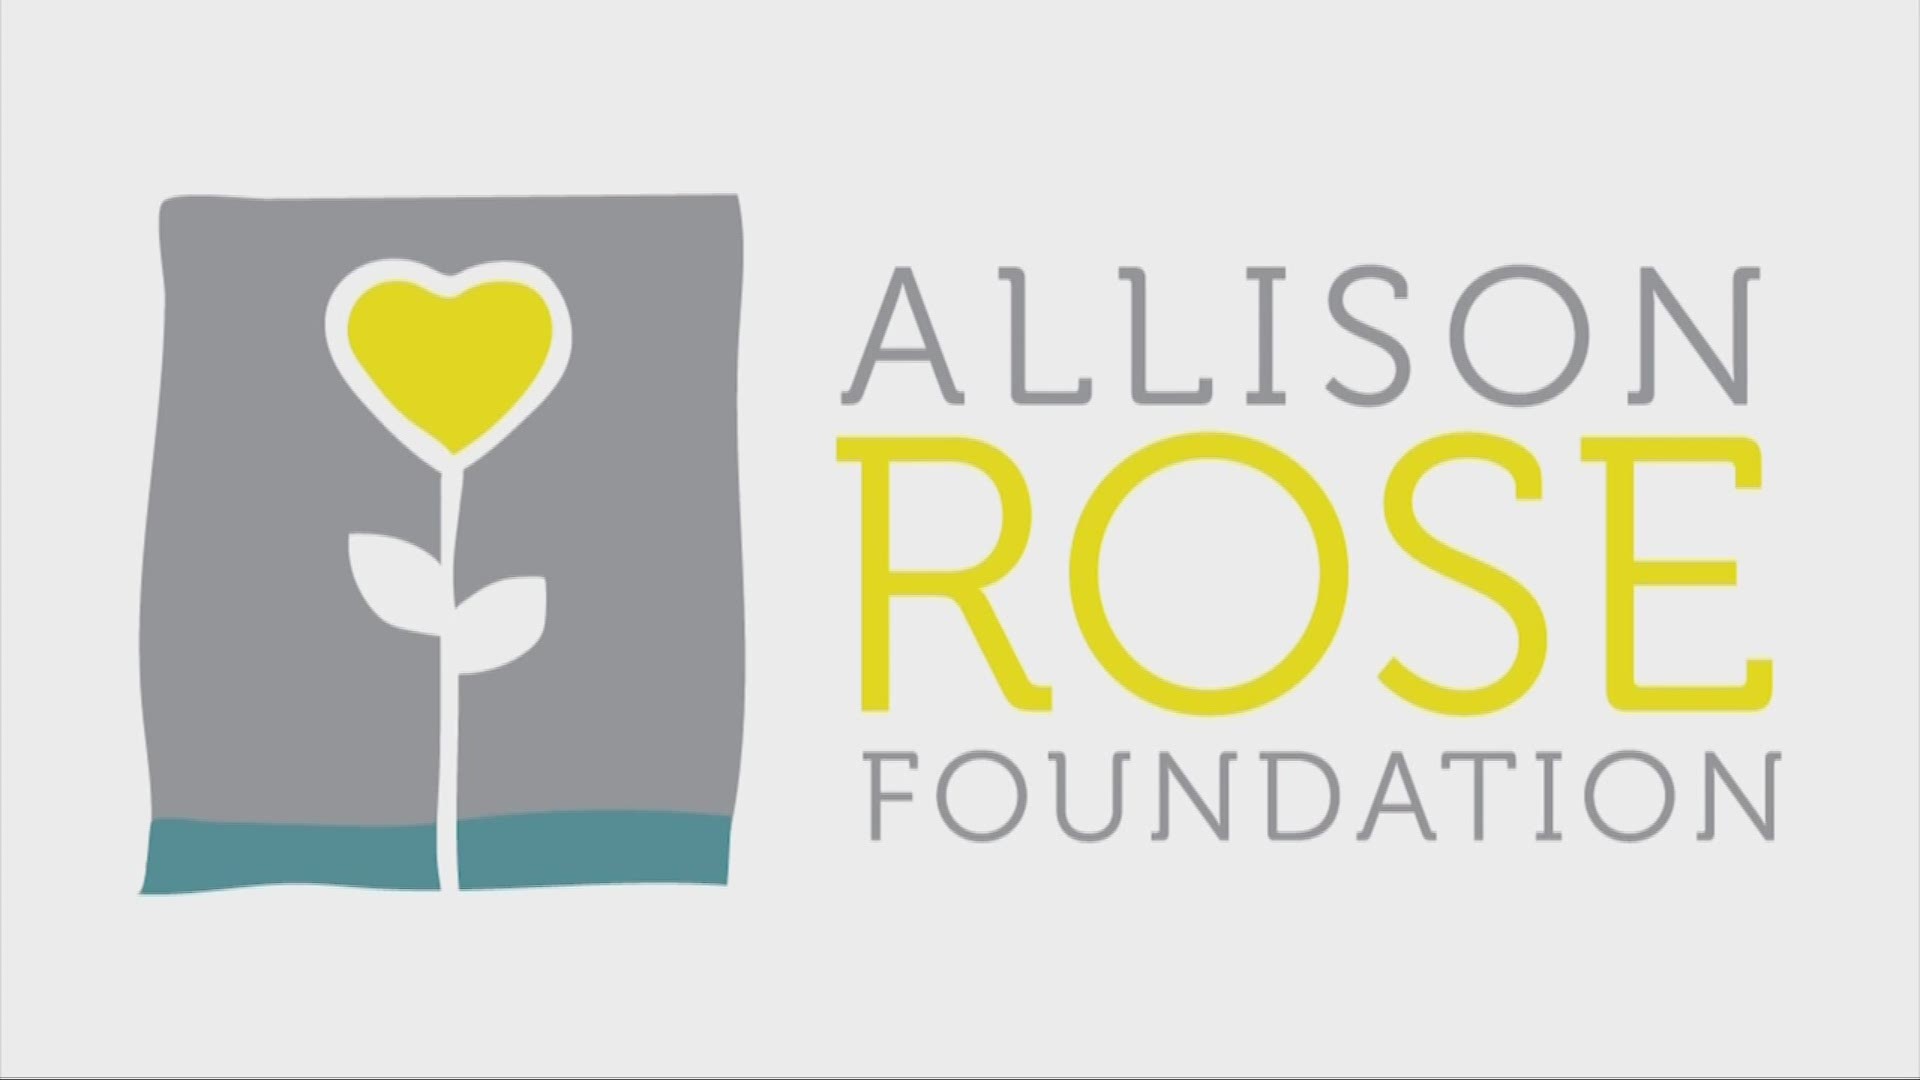 Allison Rose Foundation aims to prevent allergy tragedies